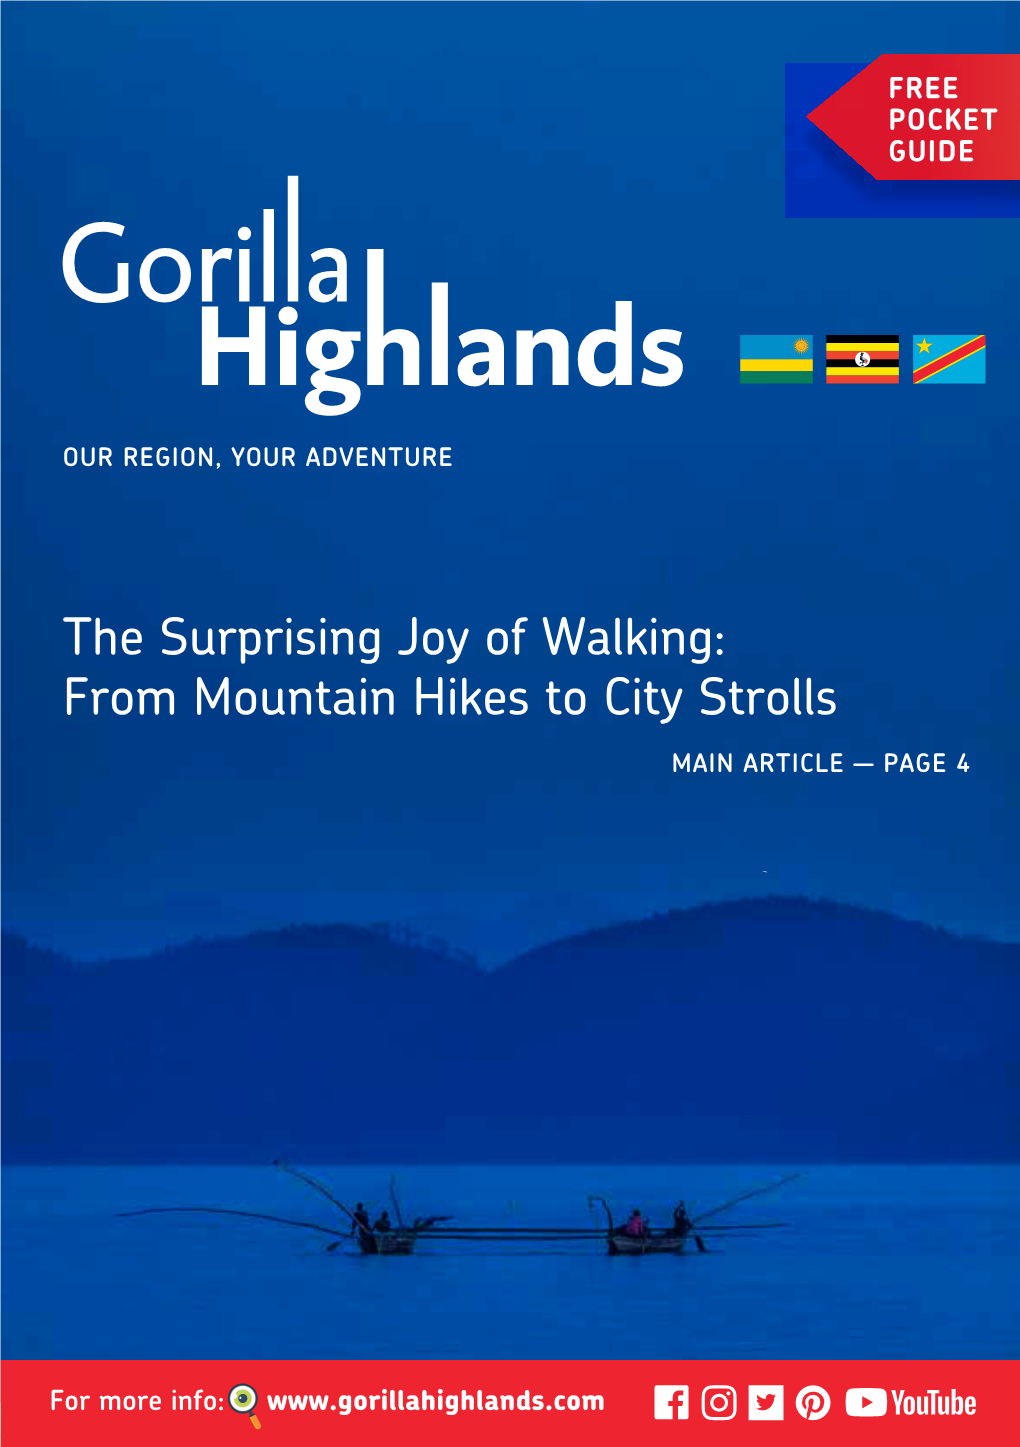 The Surprising Joy of Walking: from Mountain Hikes to City Strolls